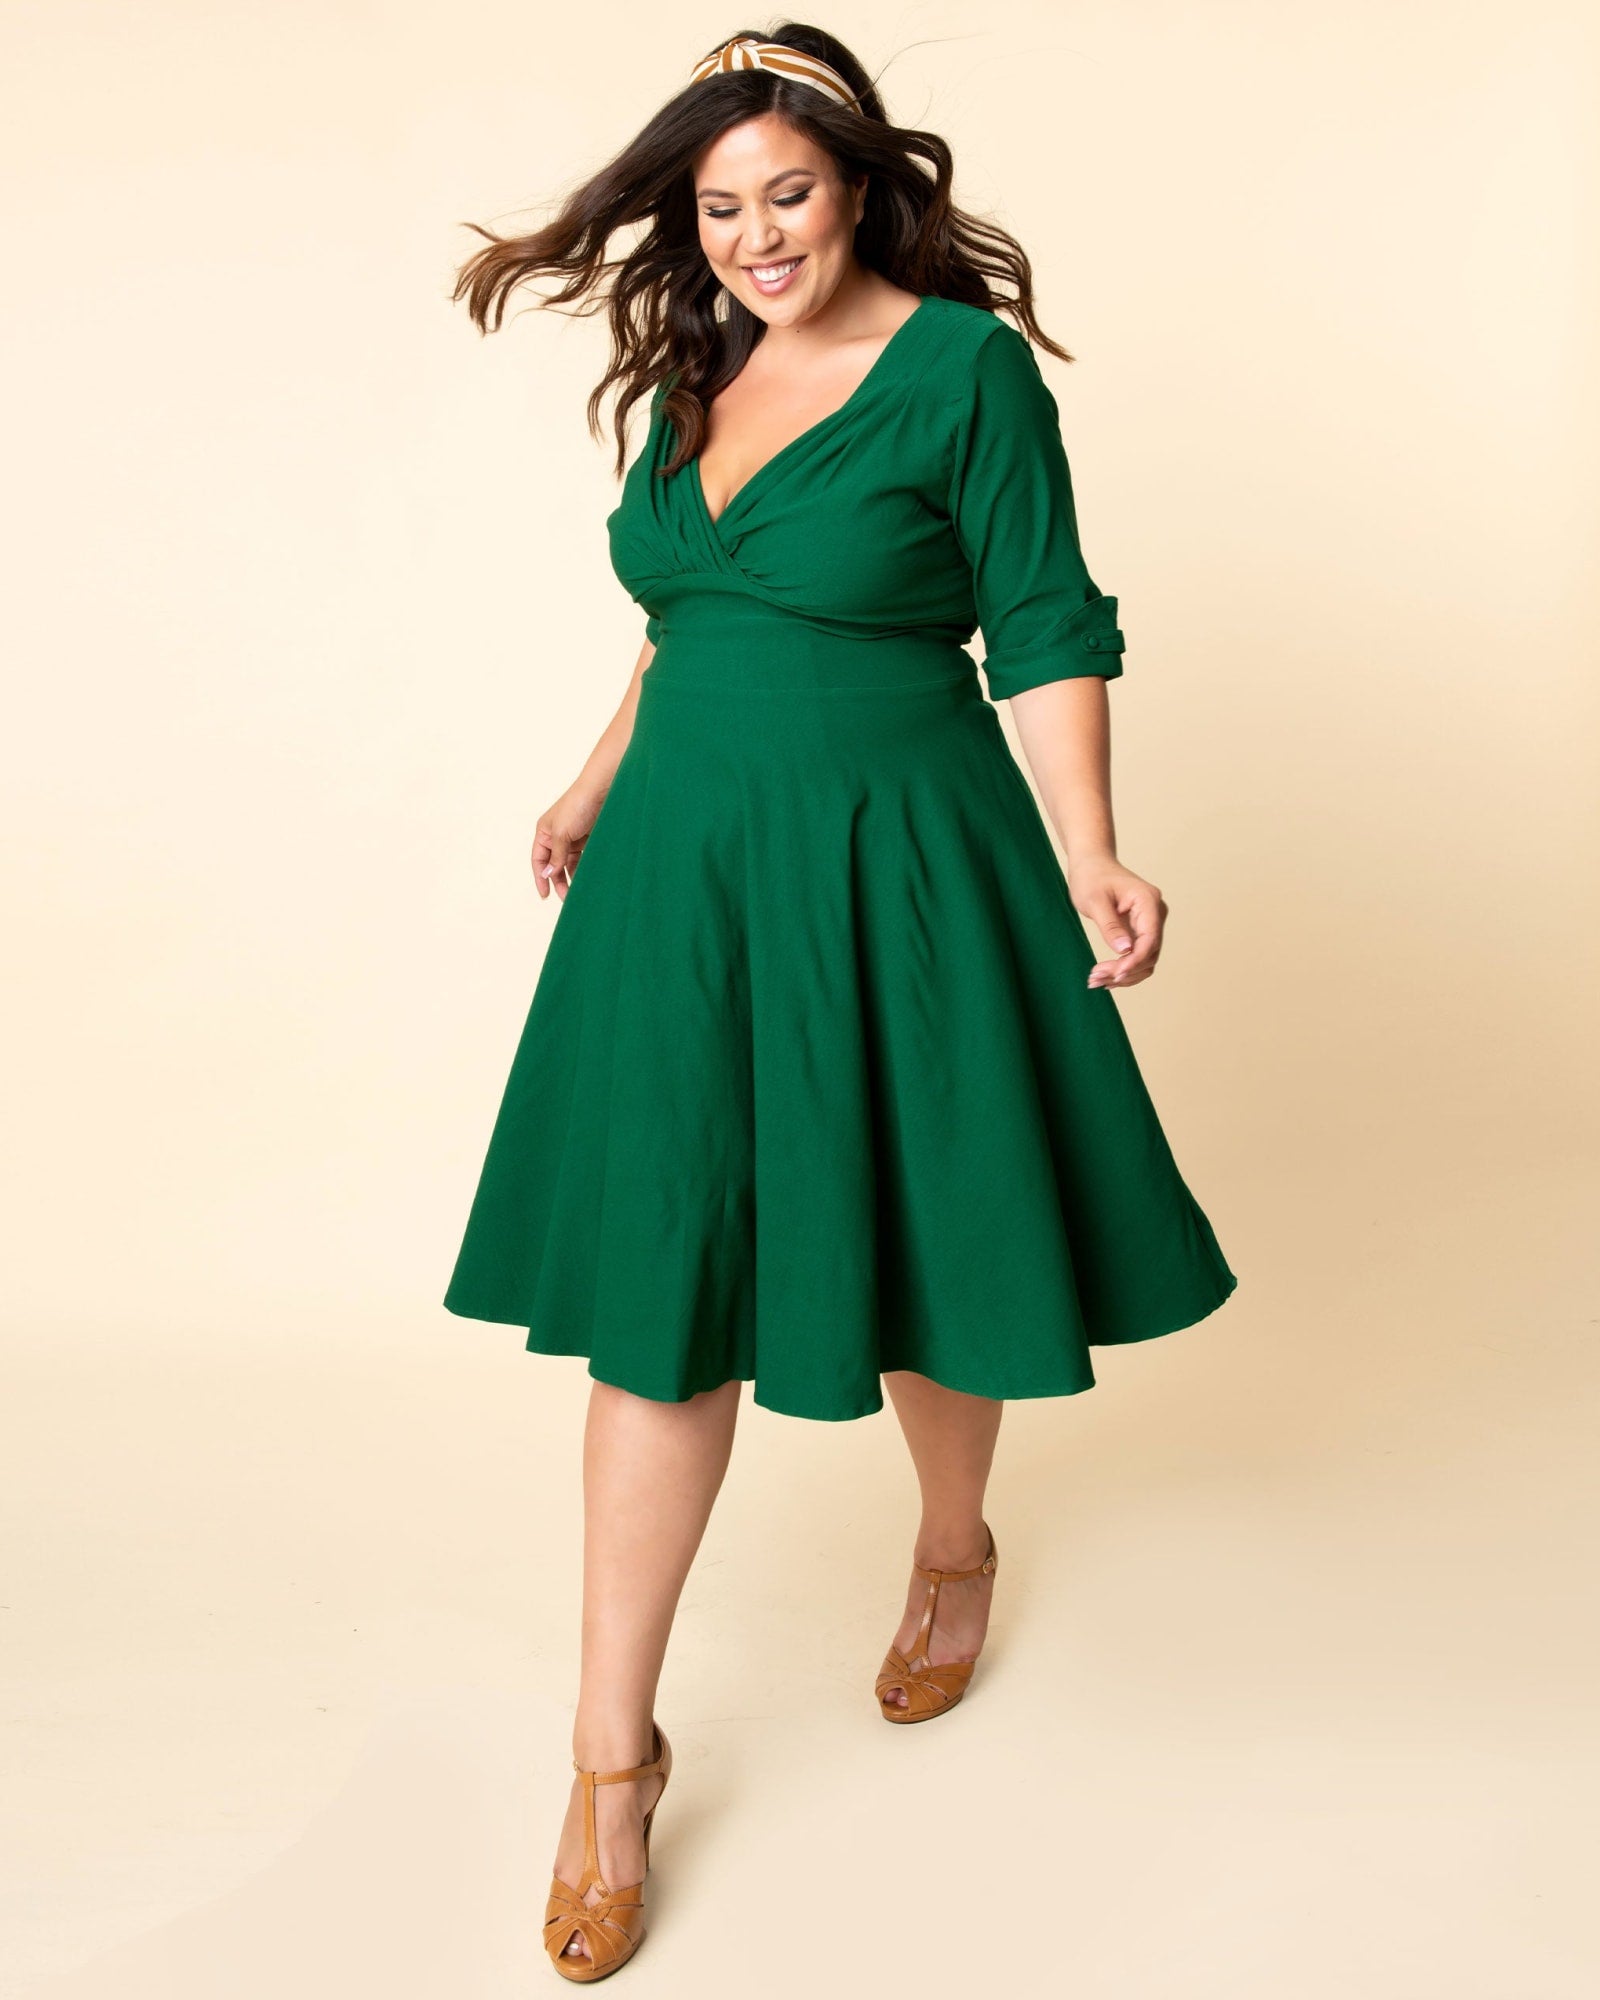 Unique Vintage Plus Size Emerald Green Delores Swing Dress with Sleeves | Emerald Green